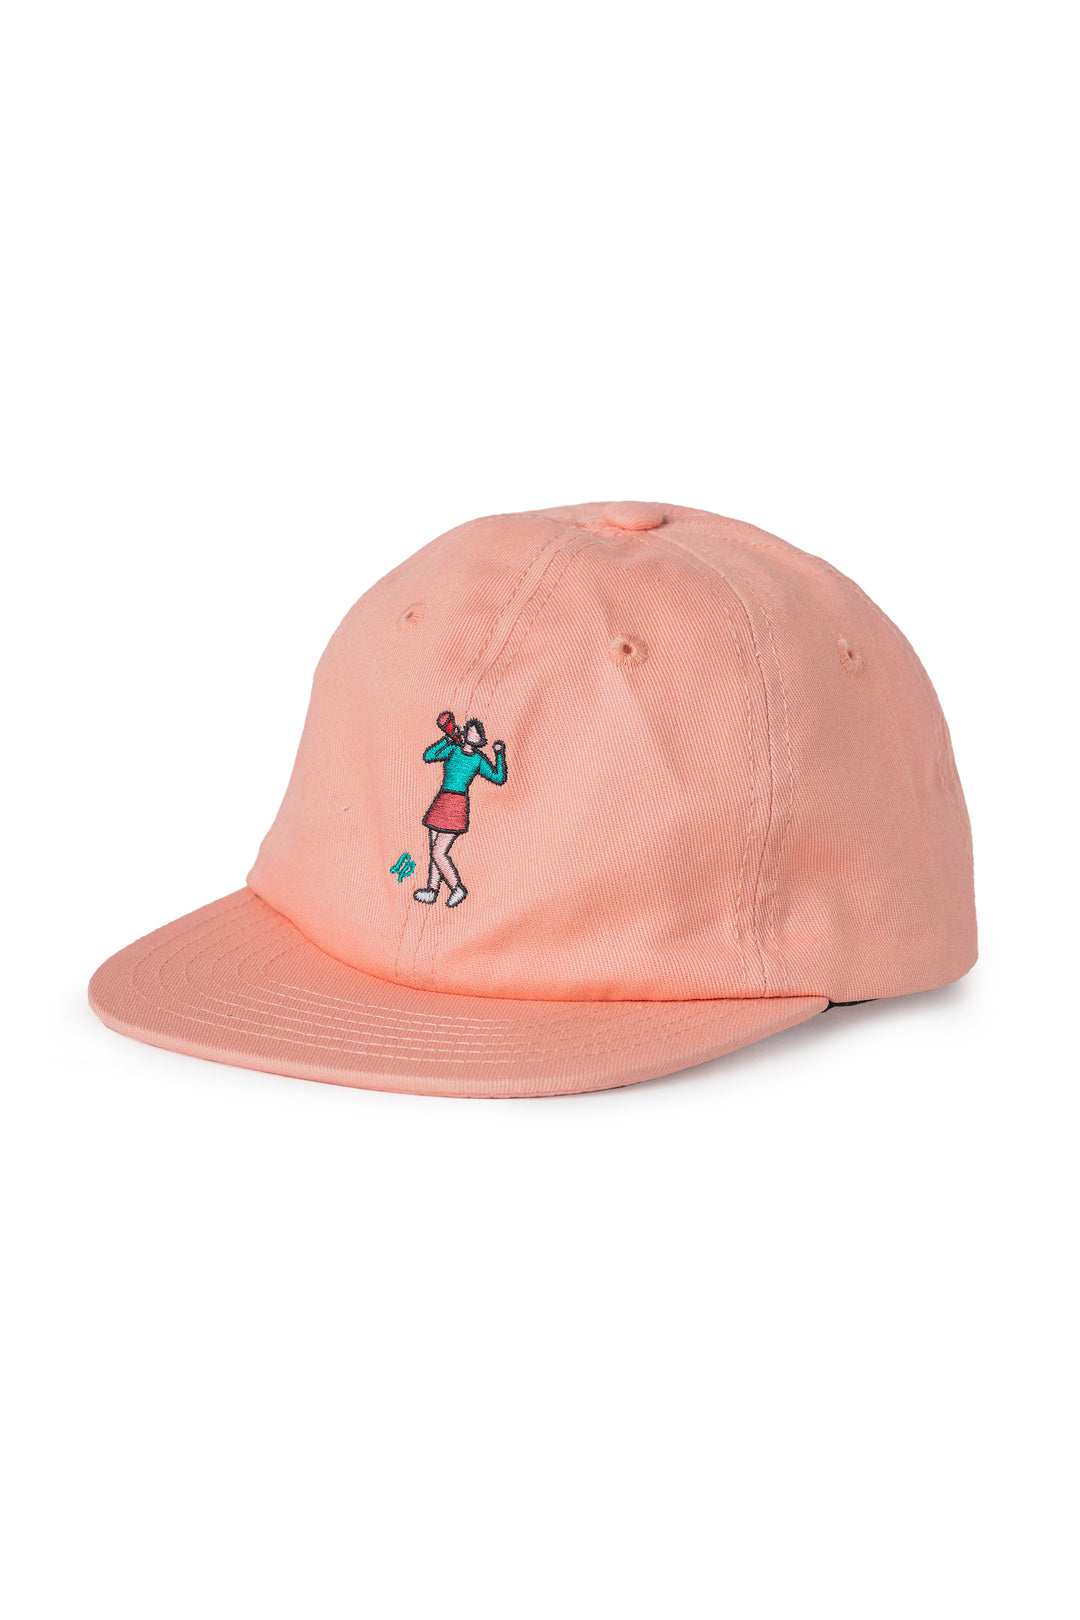 Cap - Fit Unstructured [Baby]